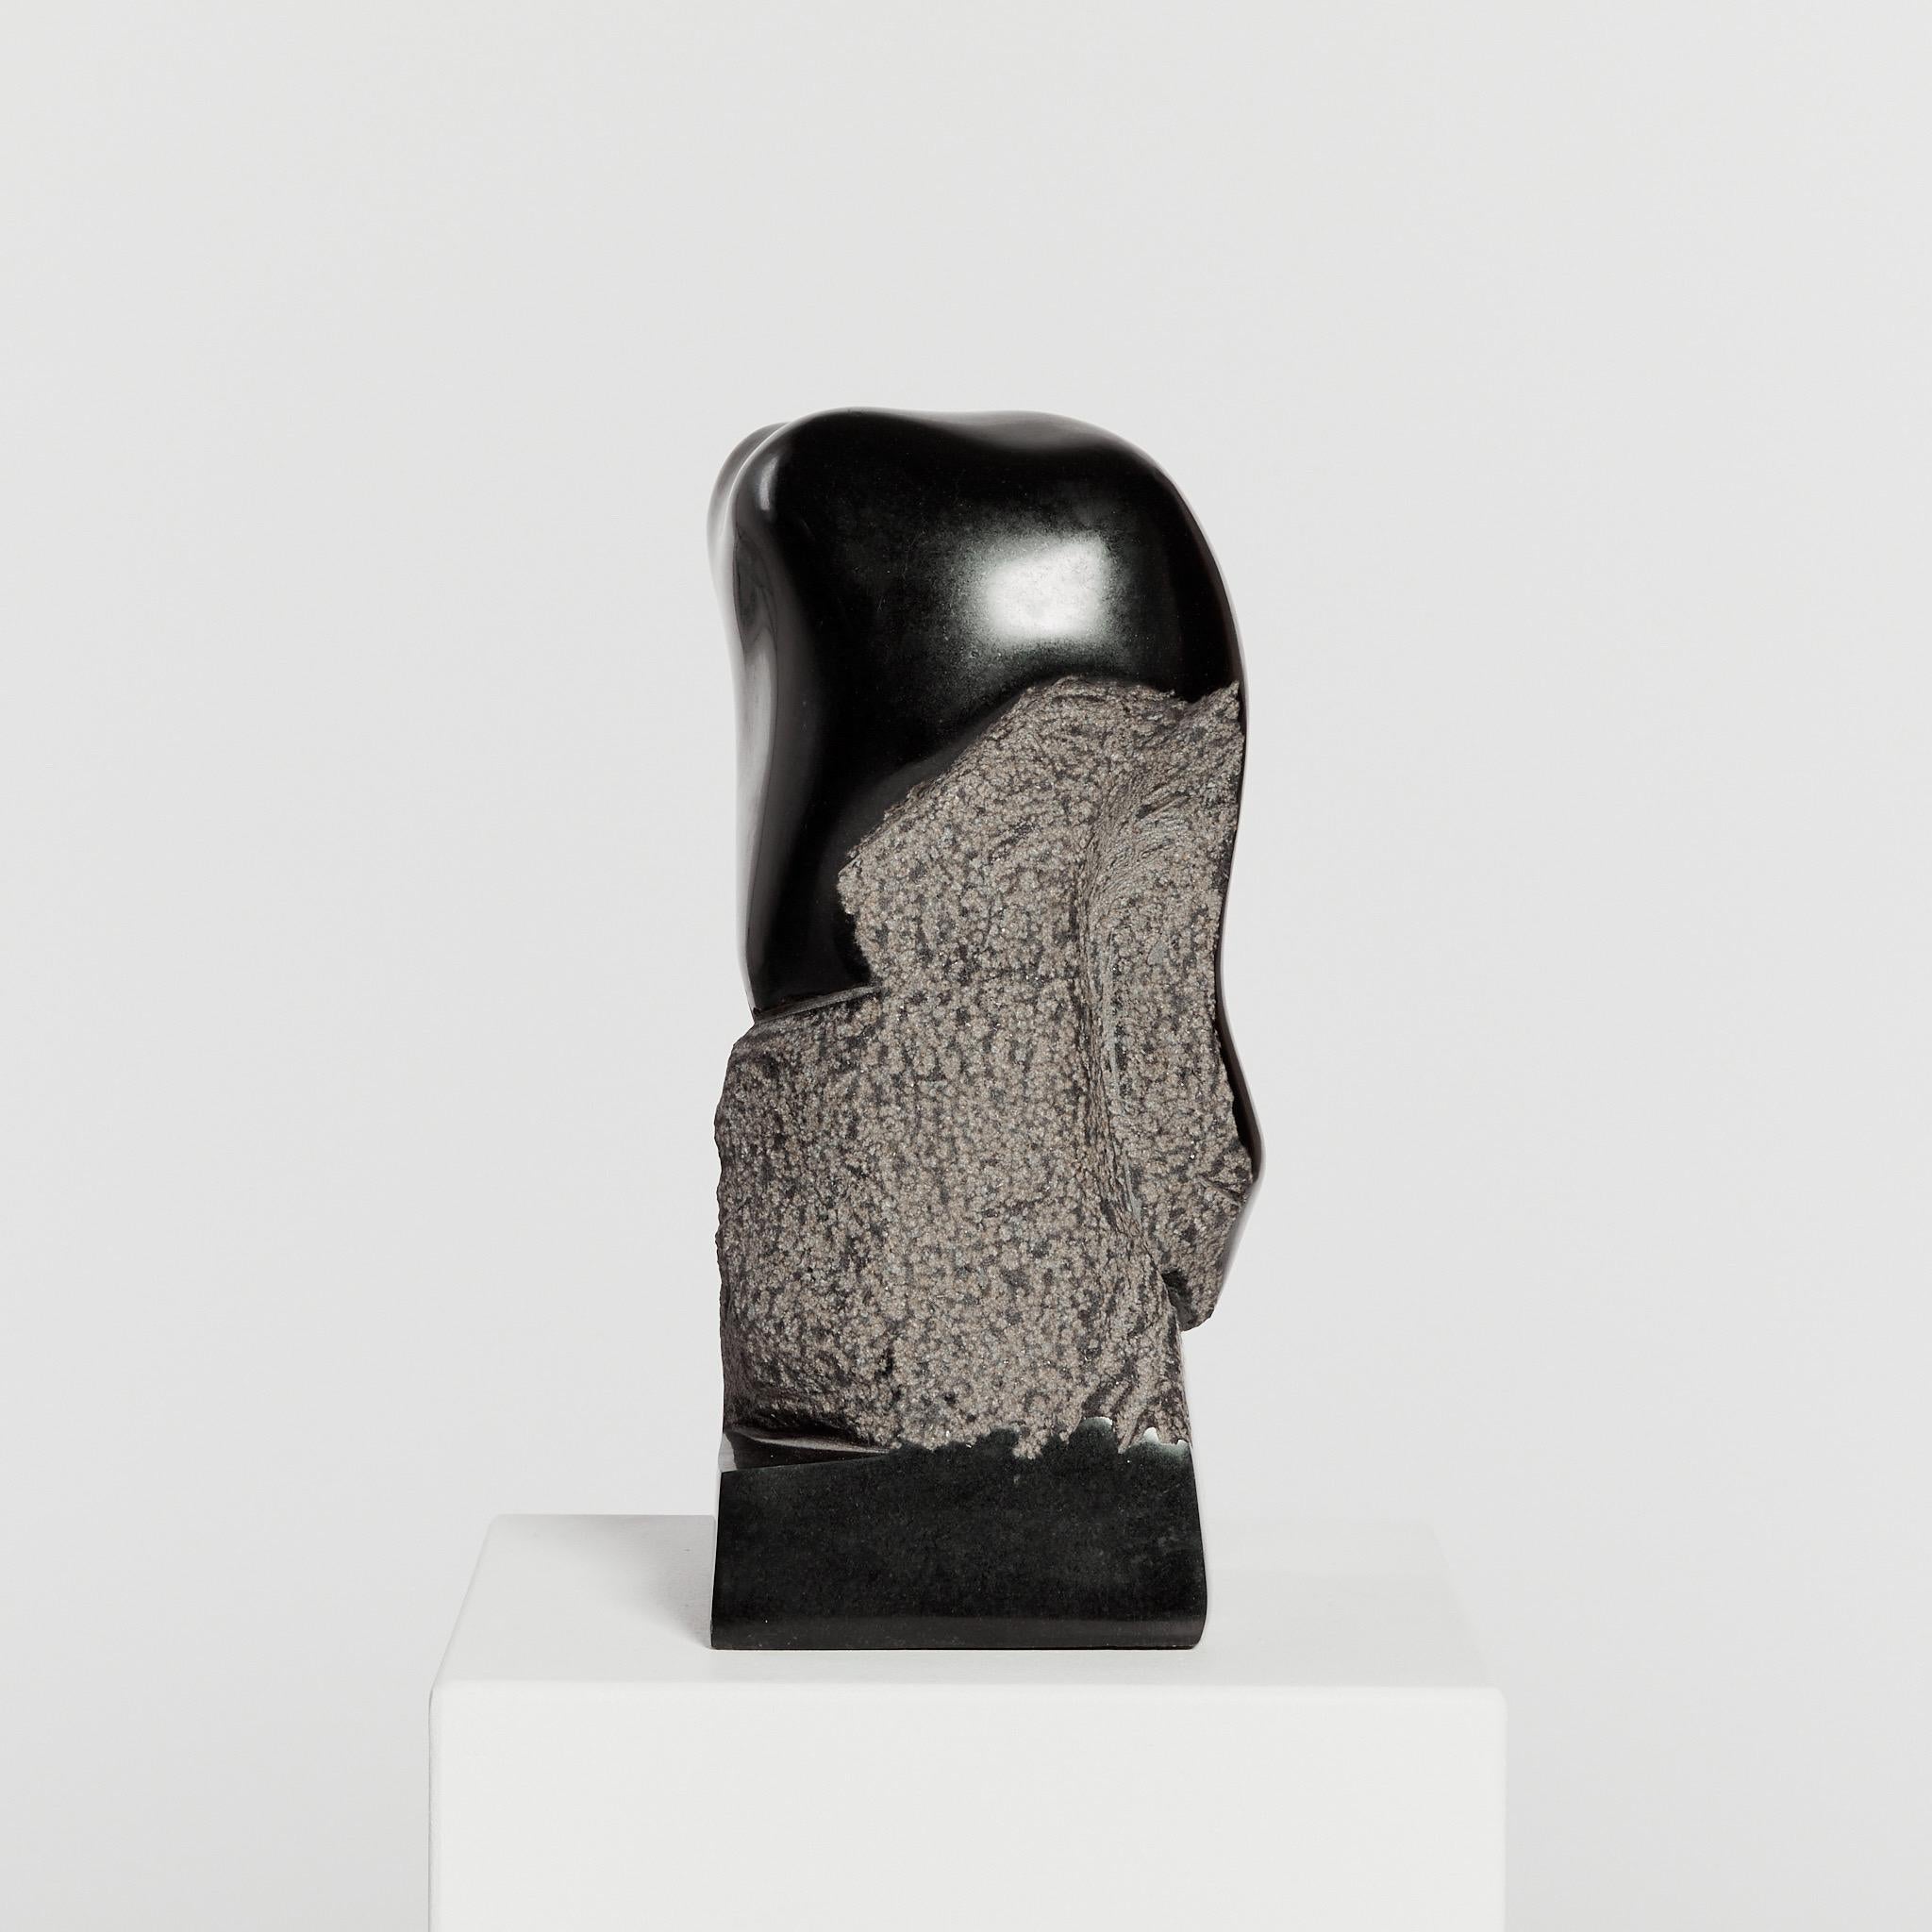 A hand carved abstract sculpture in Belgian black limestone, attributed to the late sculptor Michel Hoppe. The freeform piece features textural stippled detail and carved plinth.

The piece is in immaculate condition, without chips or